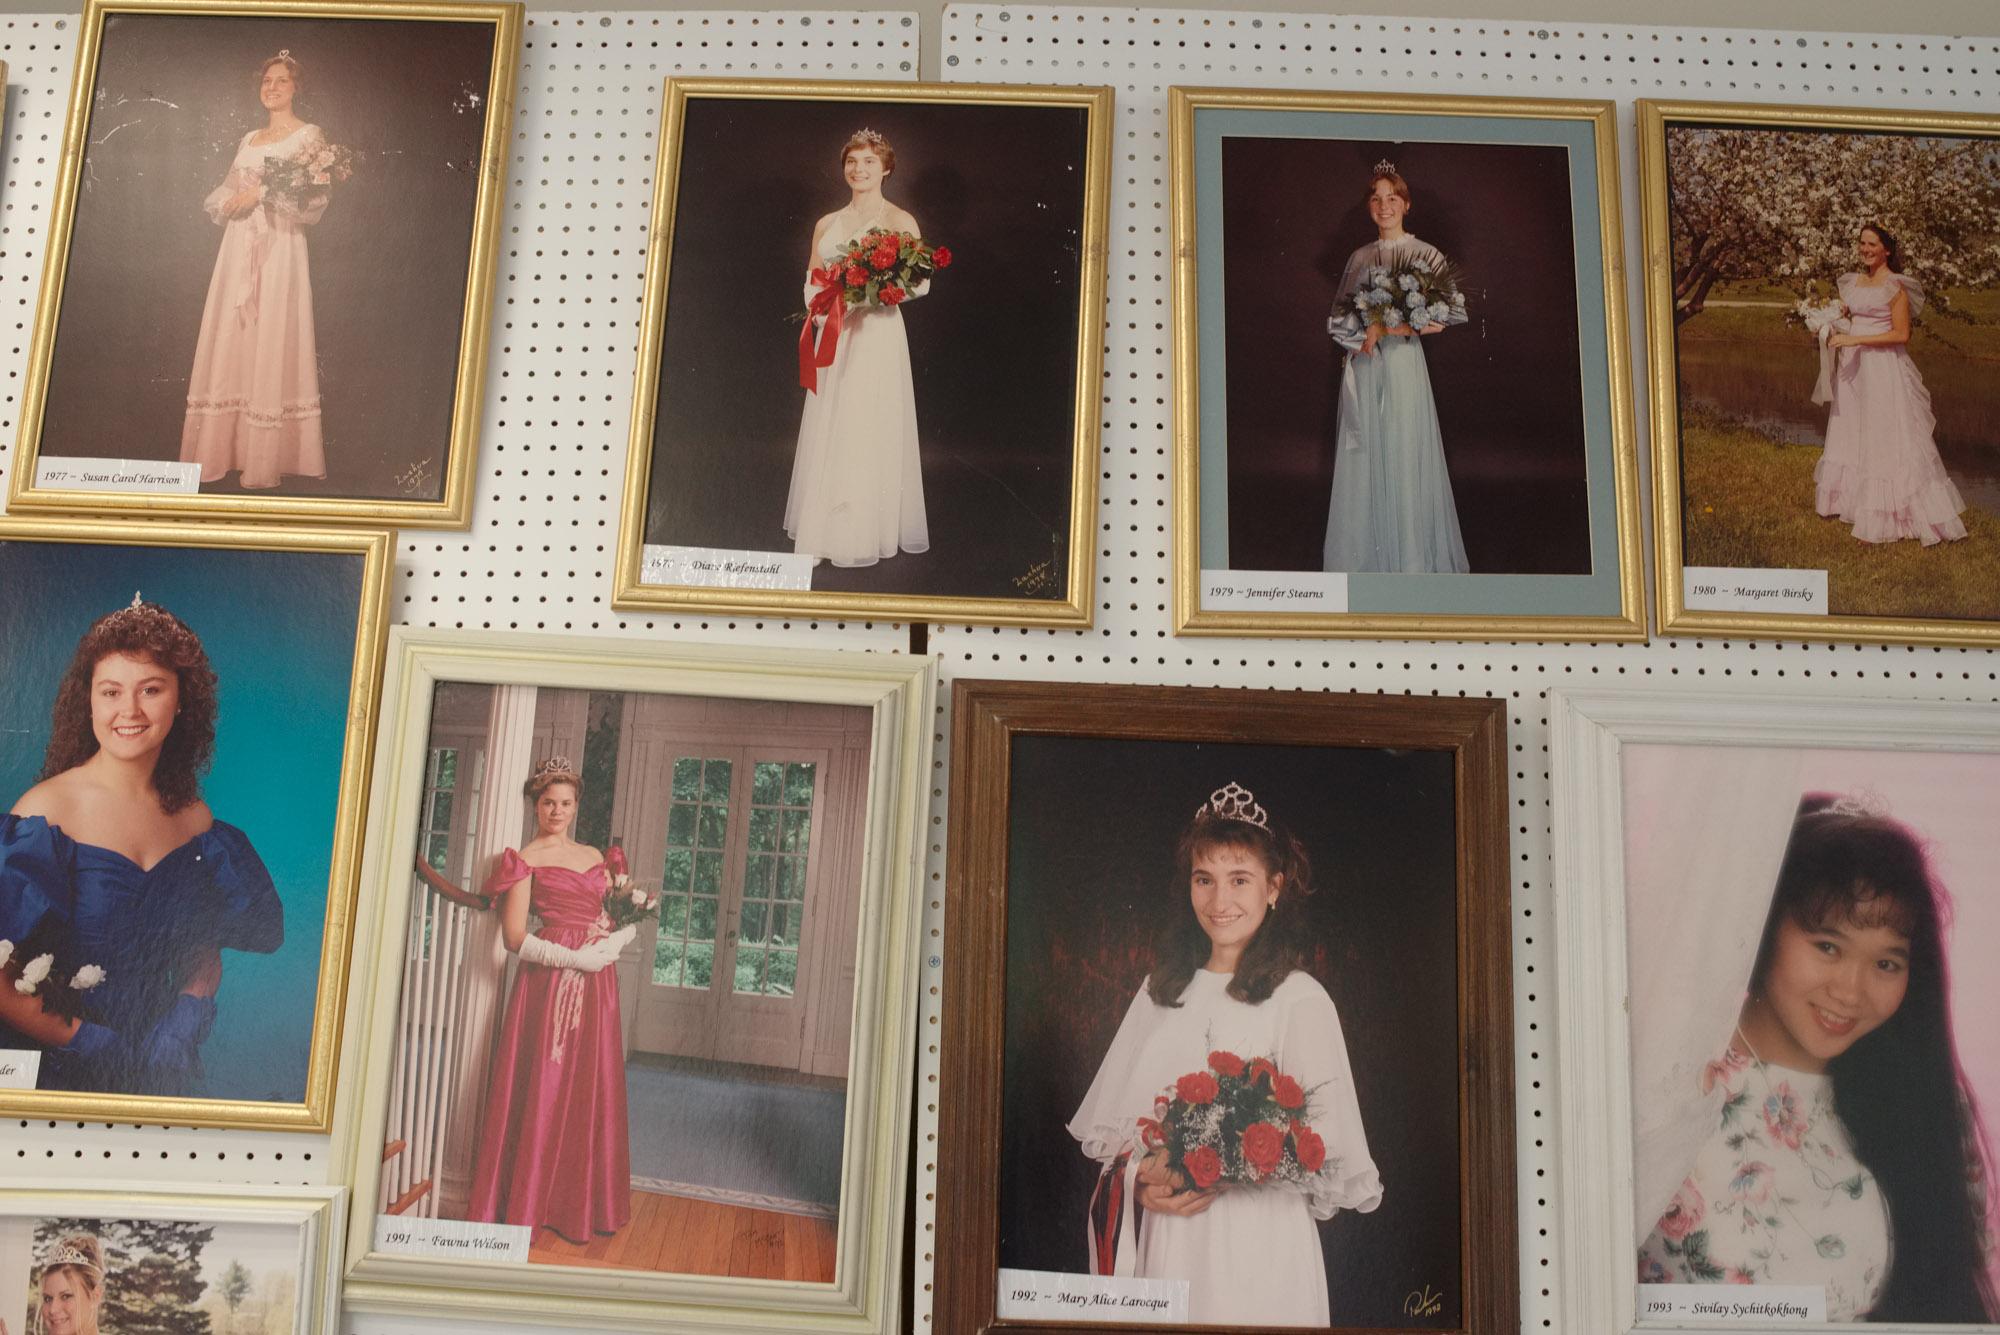 Farewell, With Elegance - Formal portraits of former Apple Blossom Cotillion Queens...